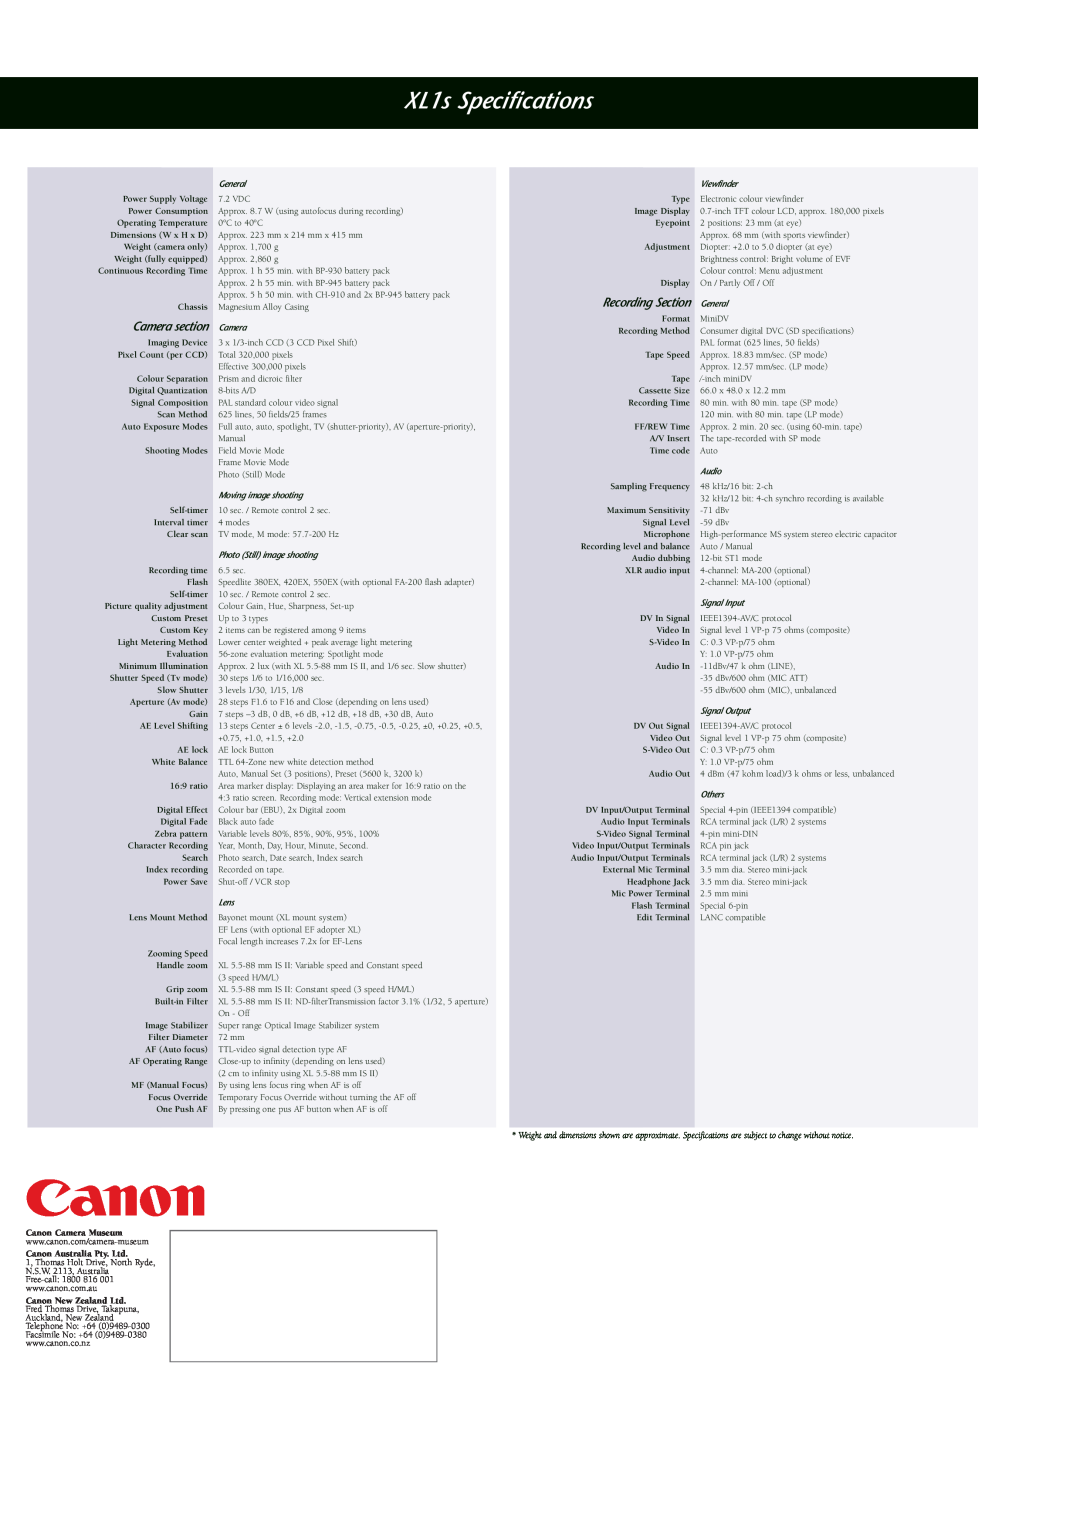 Canon XL1 S manual XL1s Specifications, Camera section 